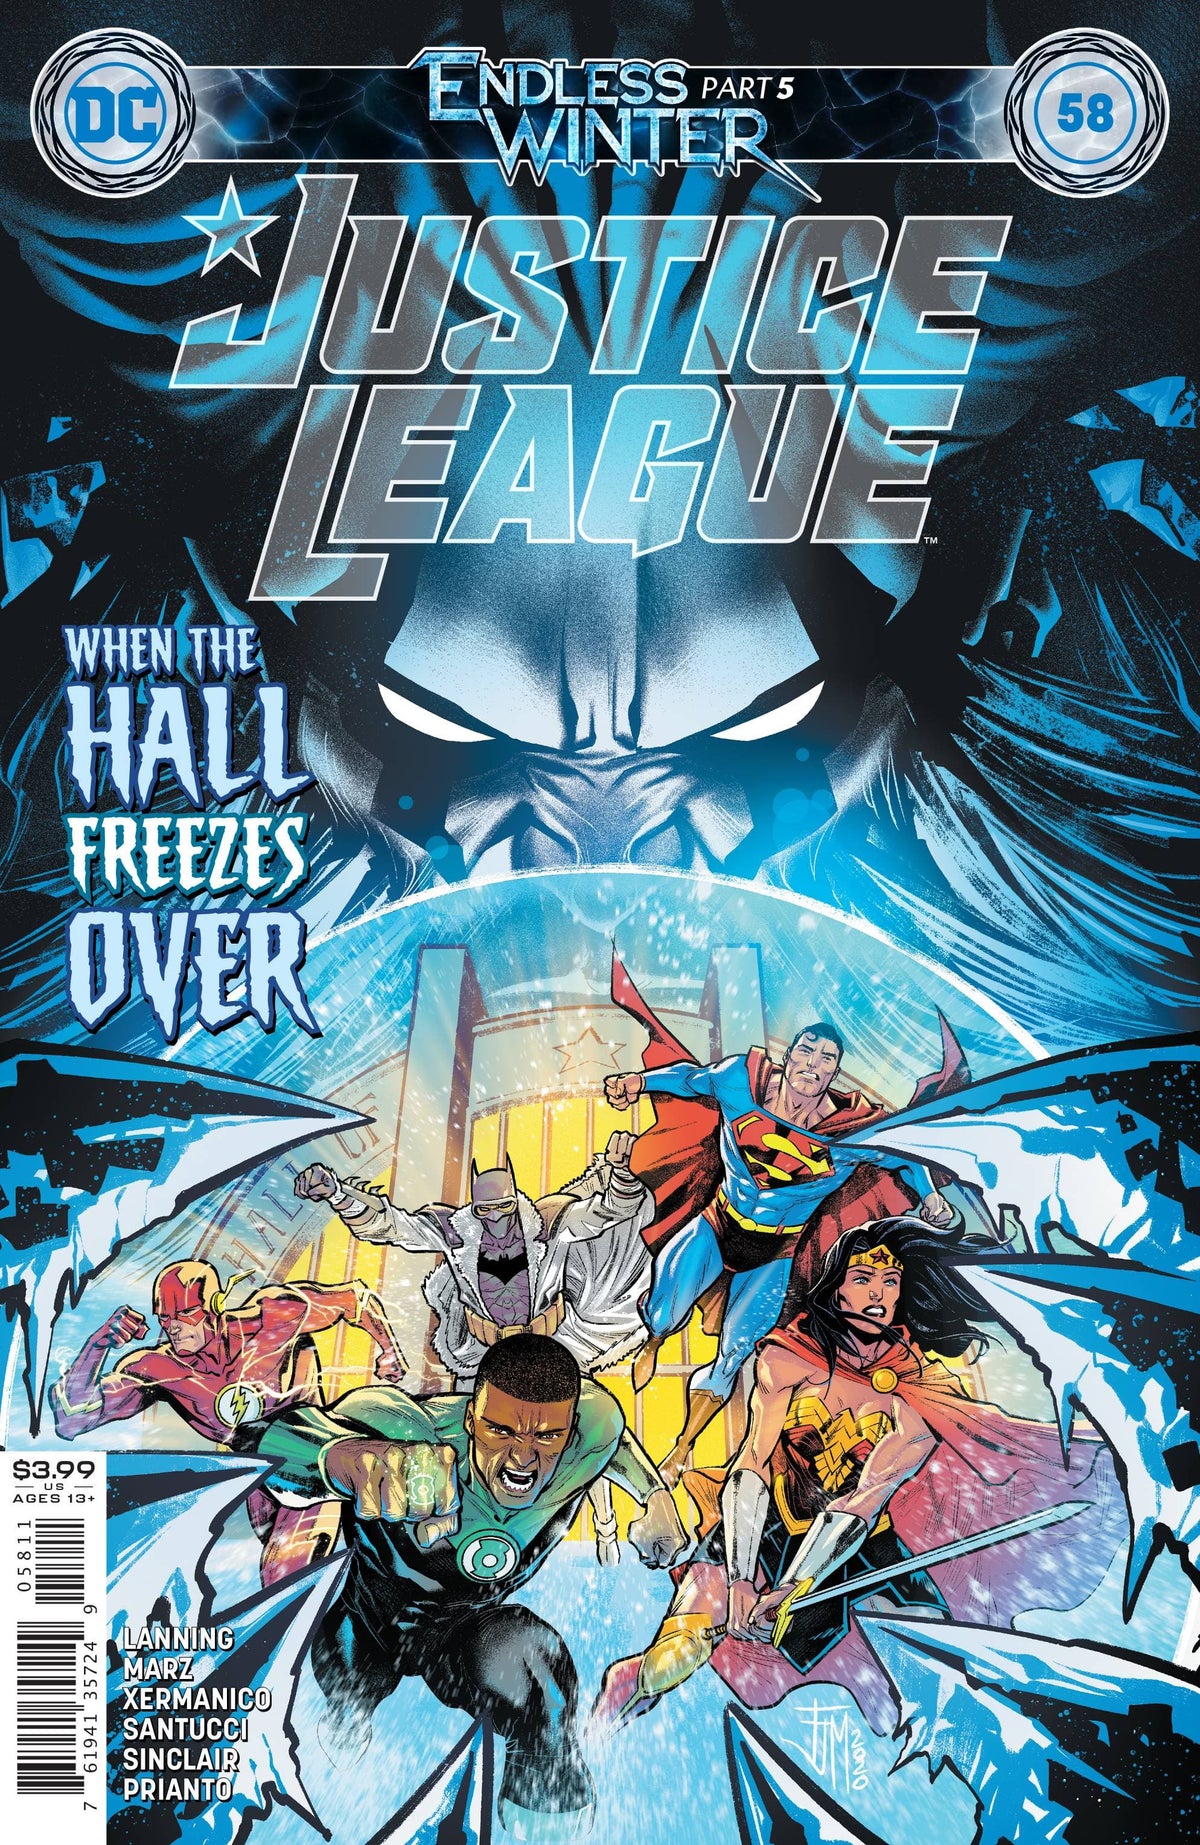 JUSTICE LEAGUE #58 - Third Eye